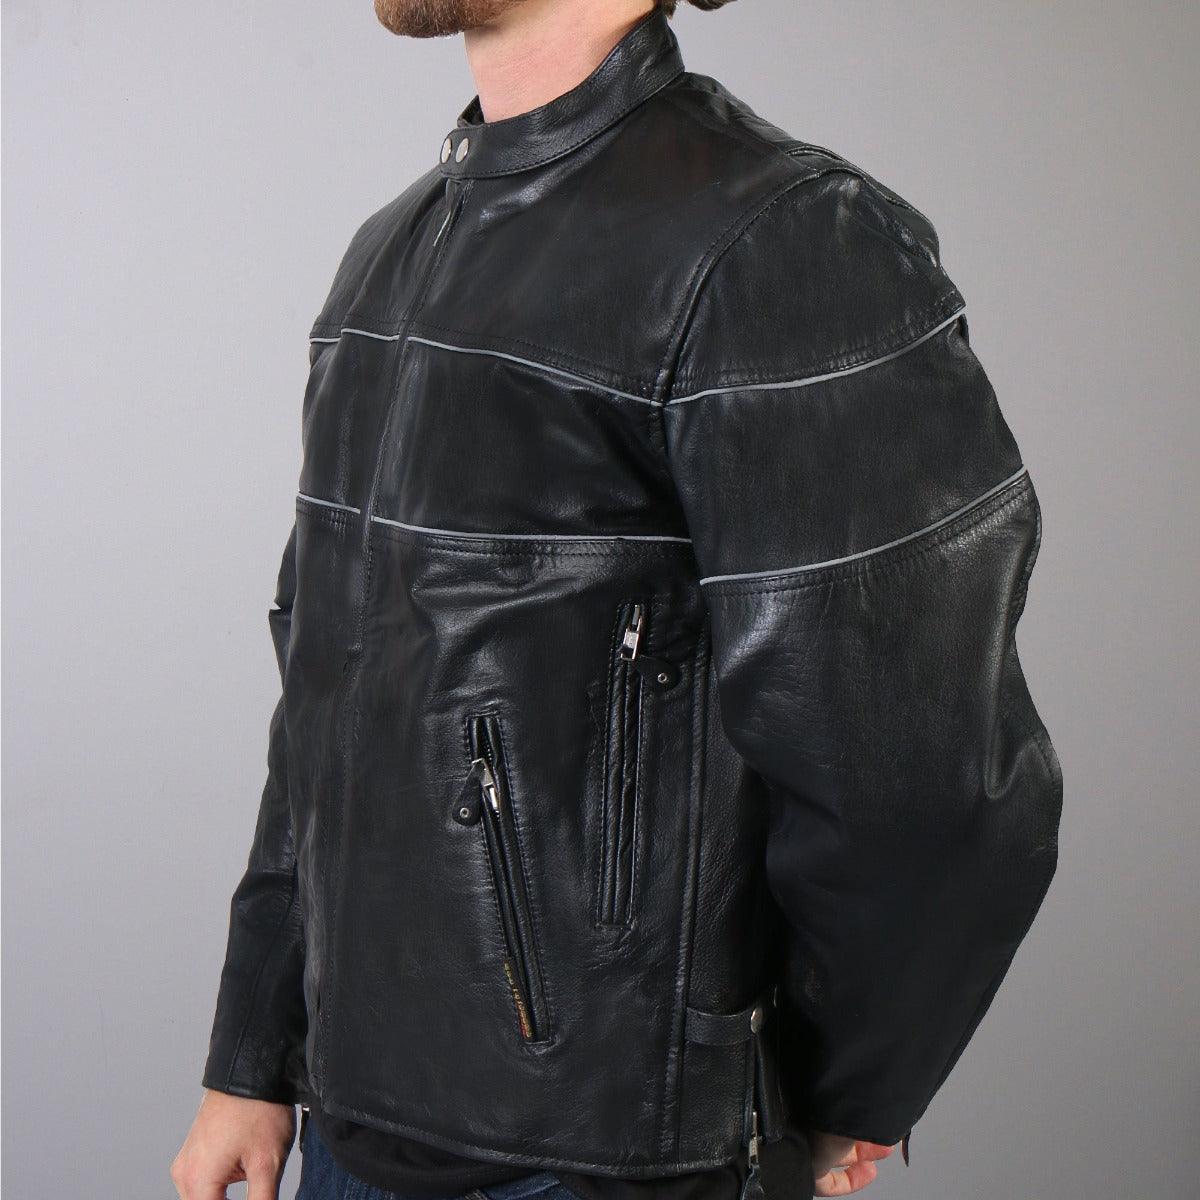 Hot Leathers Men's Leather Jacket W/ Reflective Piping - American Legend Rider